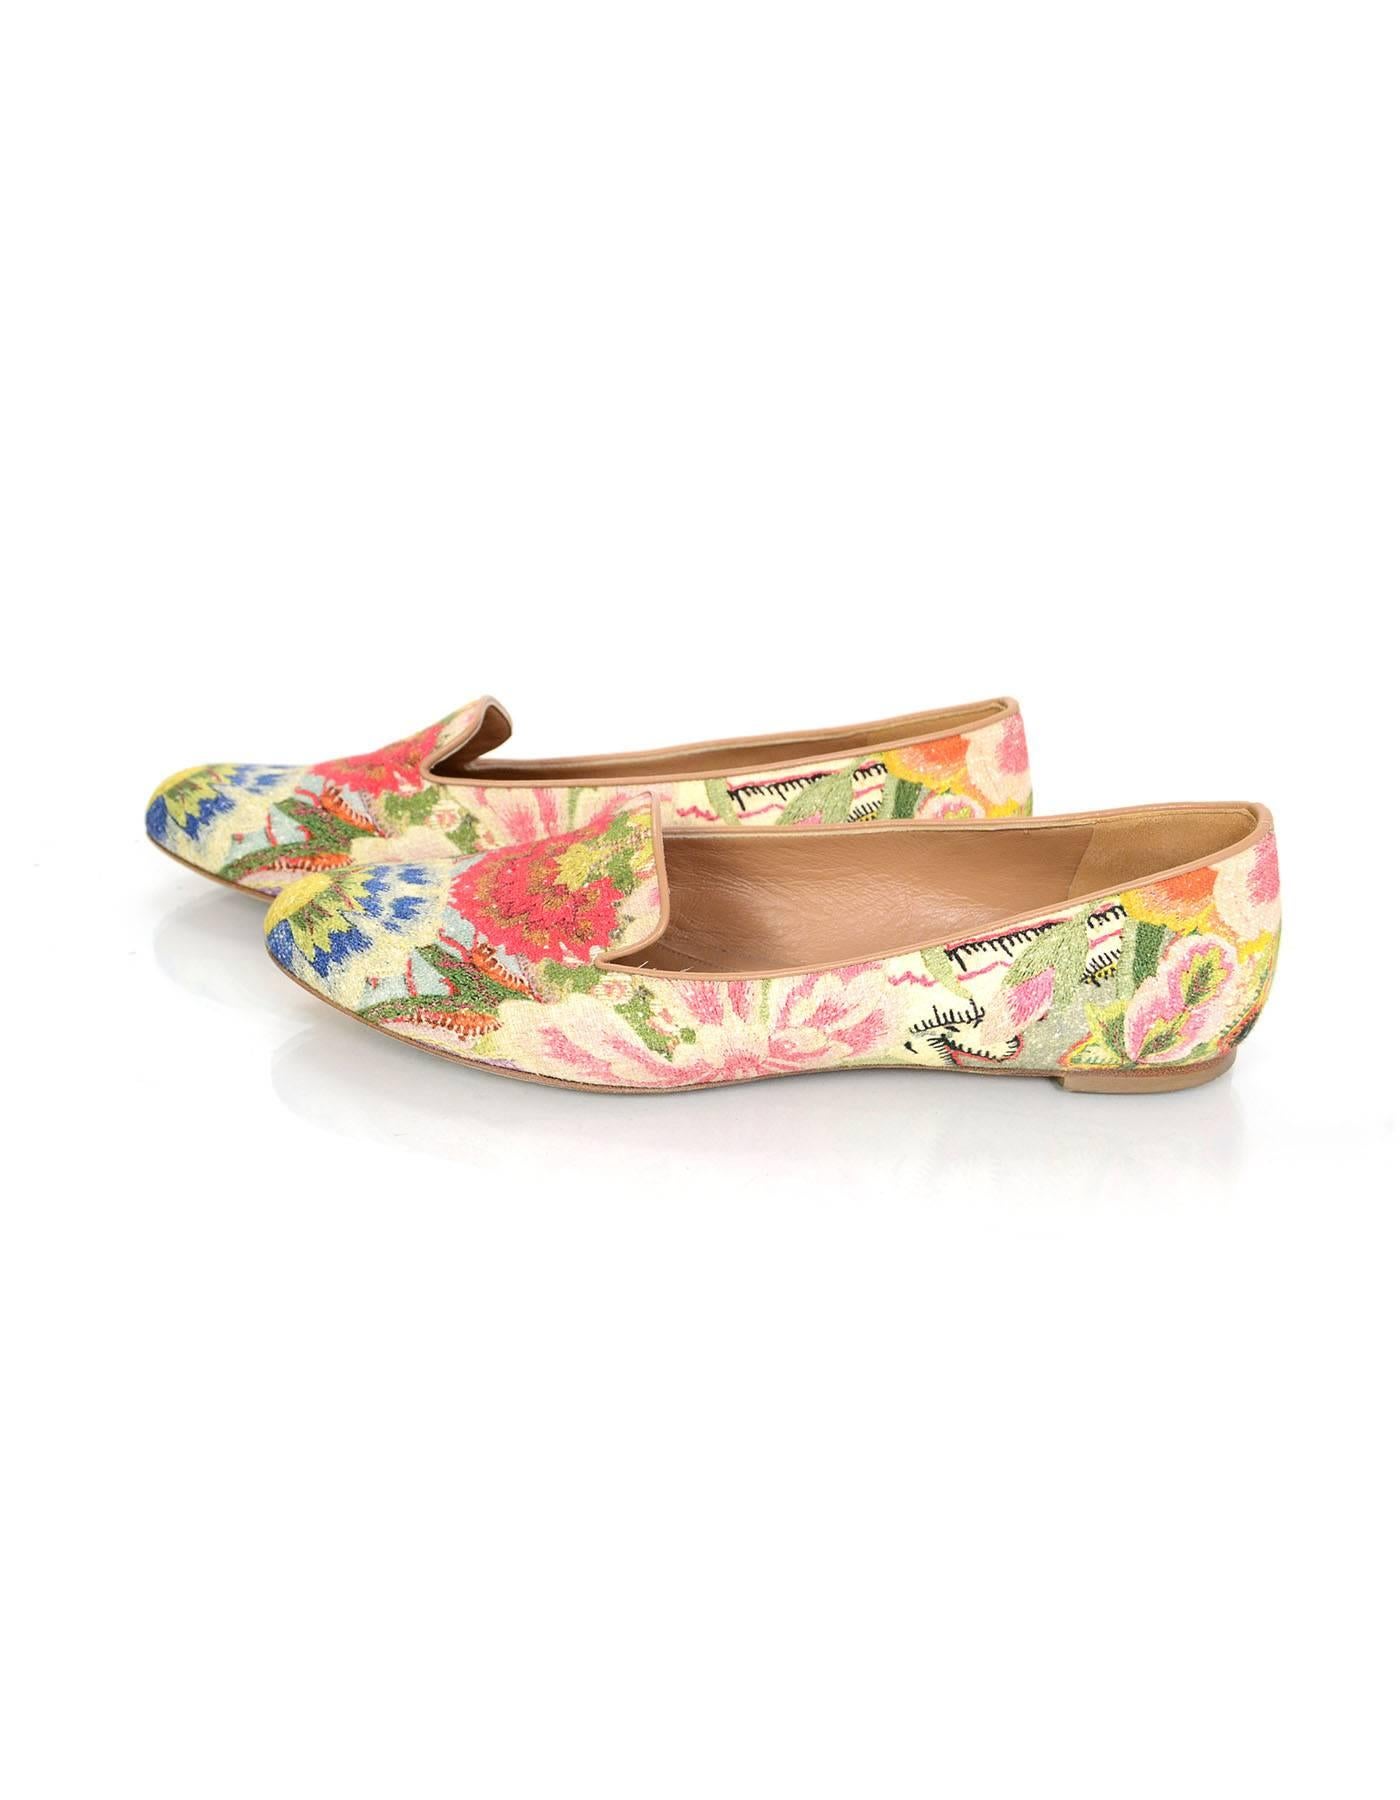 100% Authentic Alexander McQueen Loafers
Features multicolor floral print with nude leather trim.
Made In: Italy
Color: Red, yellow, blue, ivory, black, nude
Materials: Fabric and leather
Closure/Opening: Slide on
Sole Stamp: Made in Italy